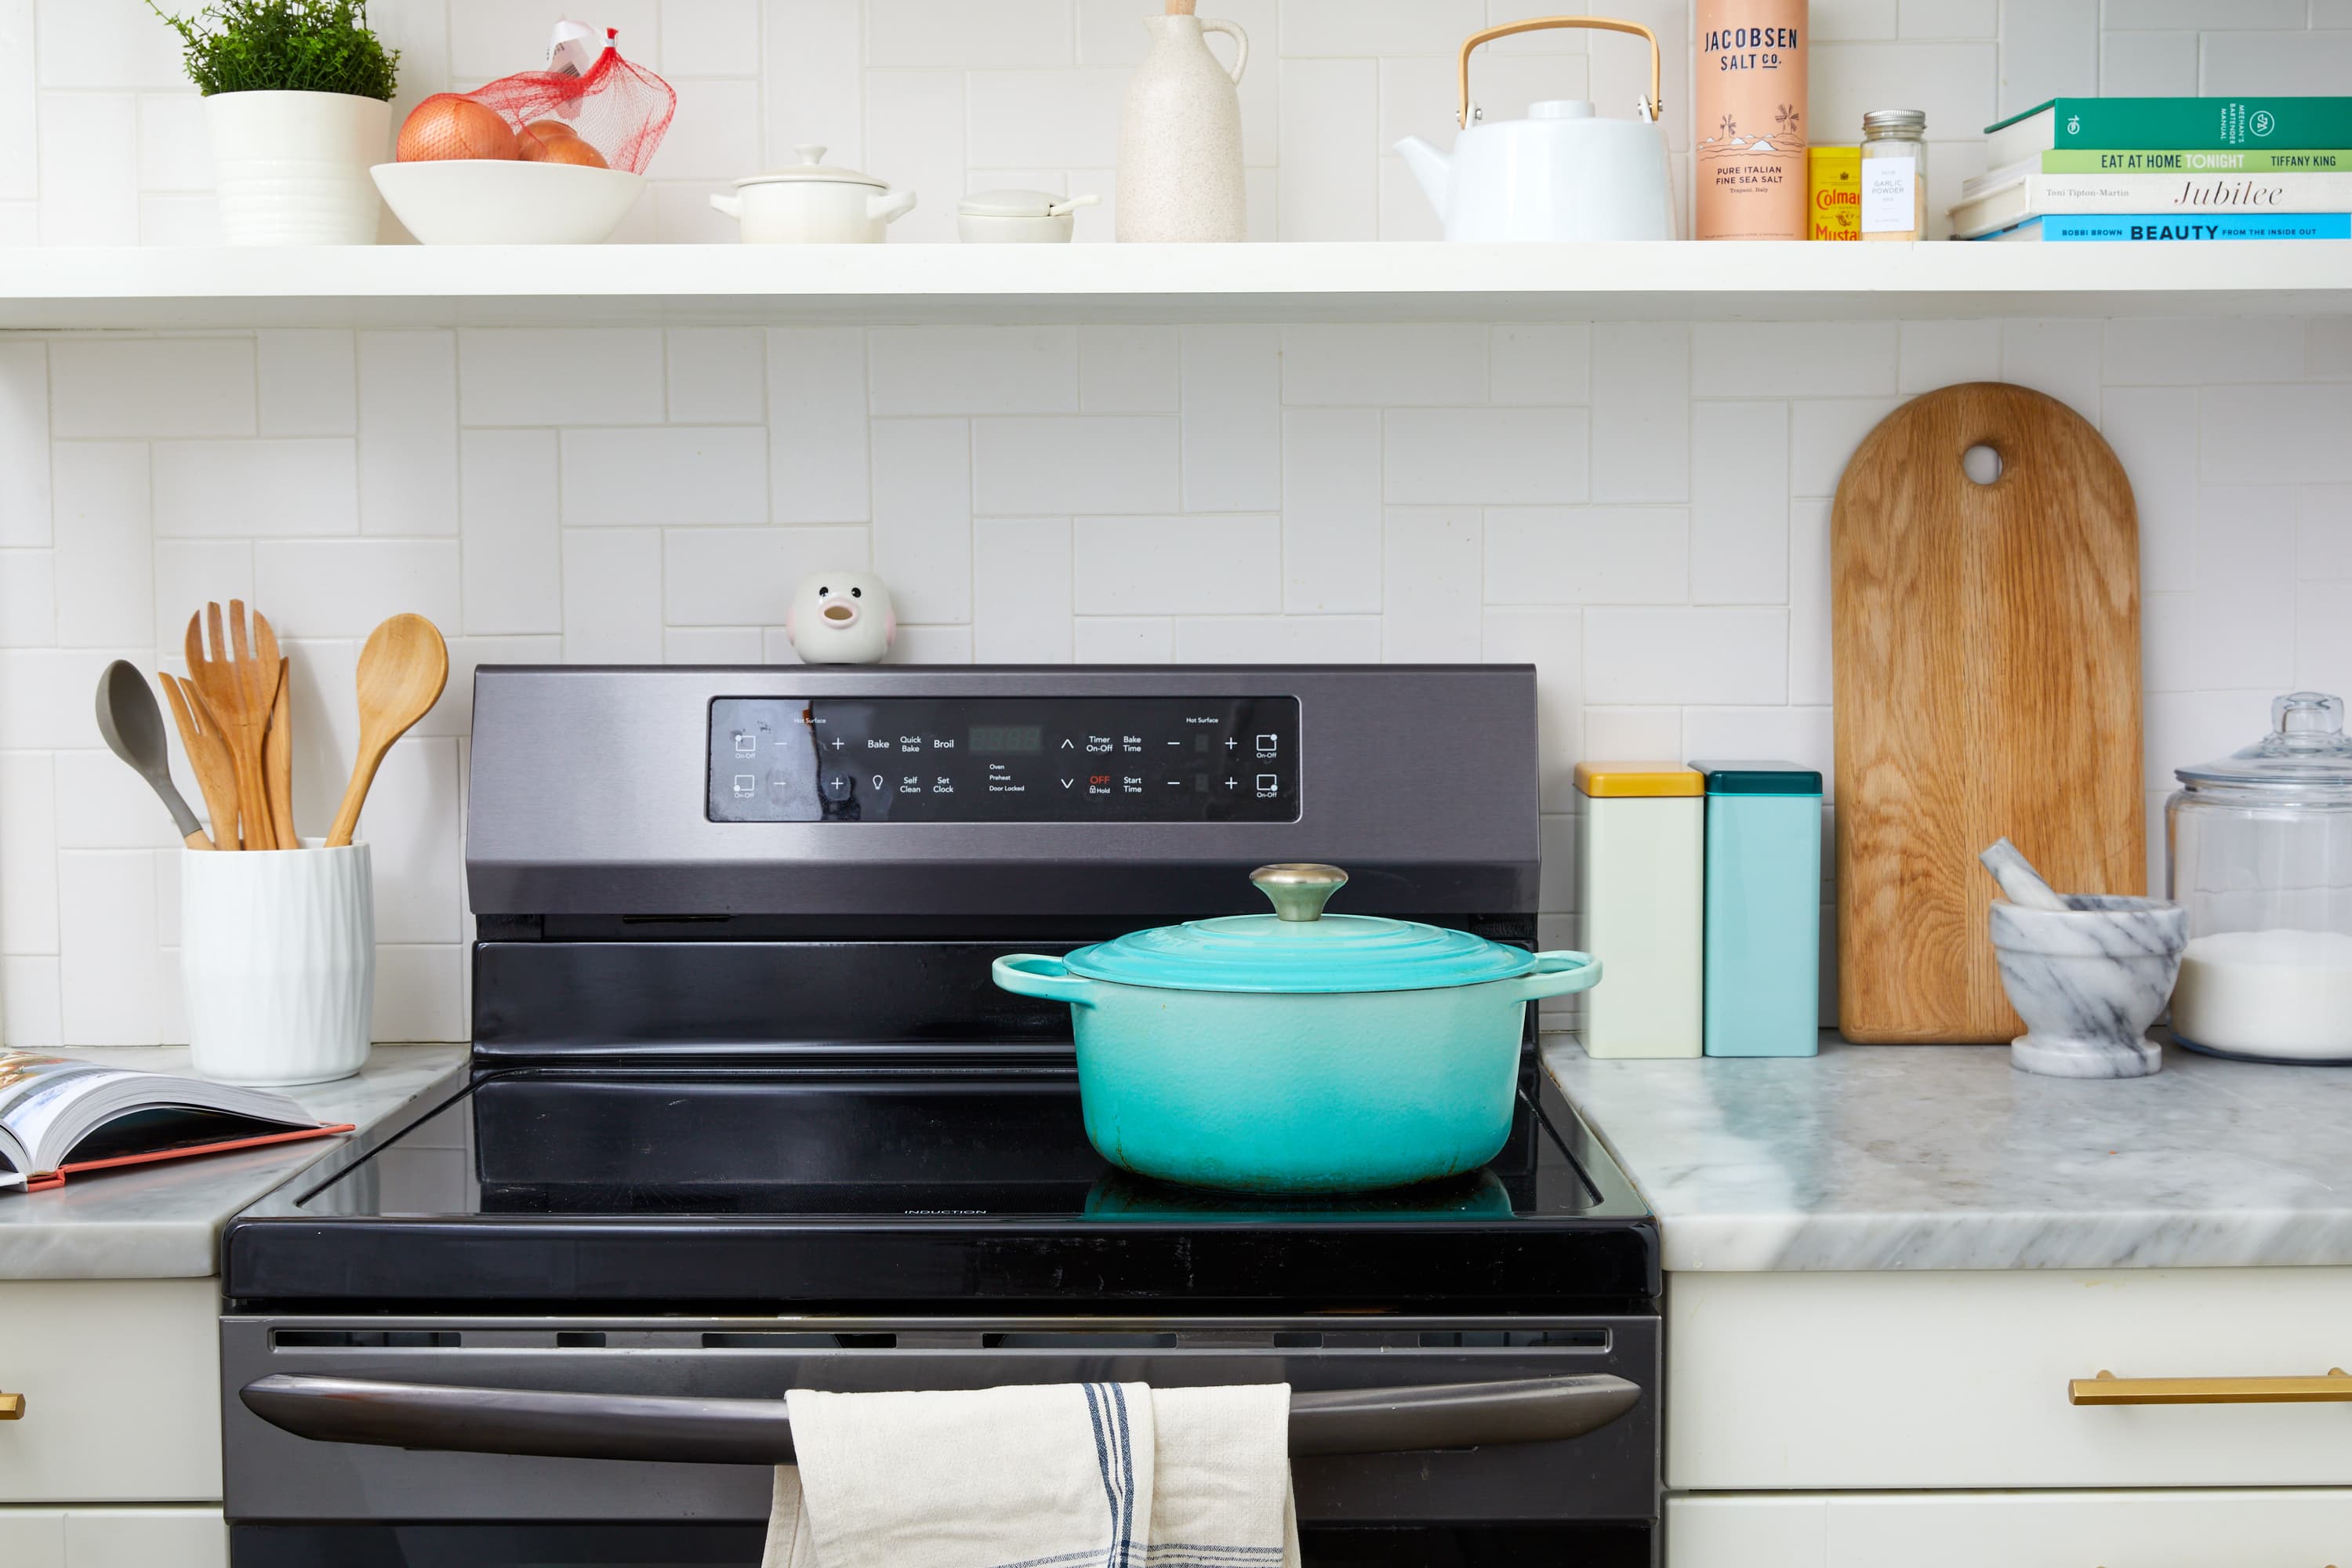 These stove gap covers will keep your kitchen so much cleaner